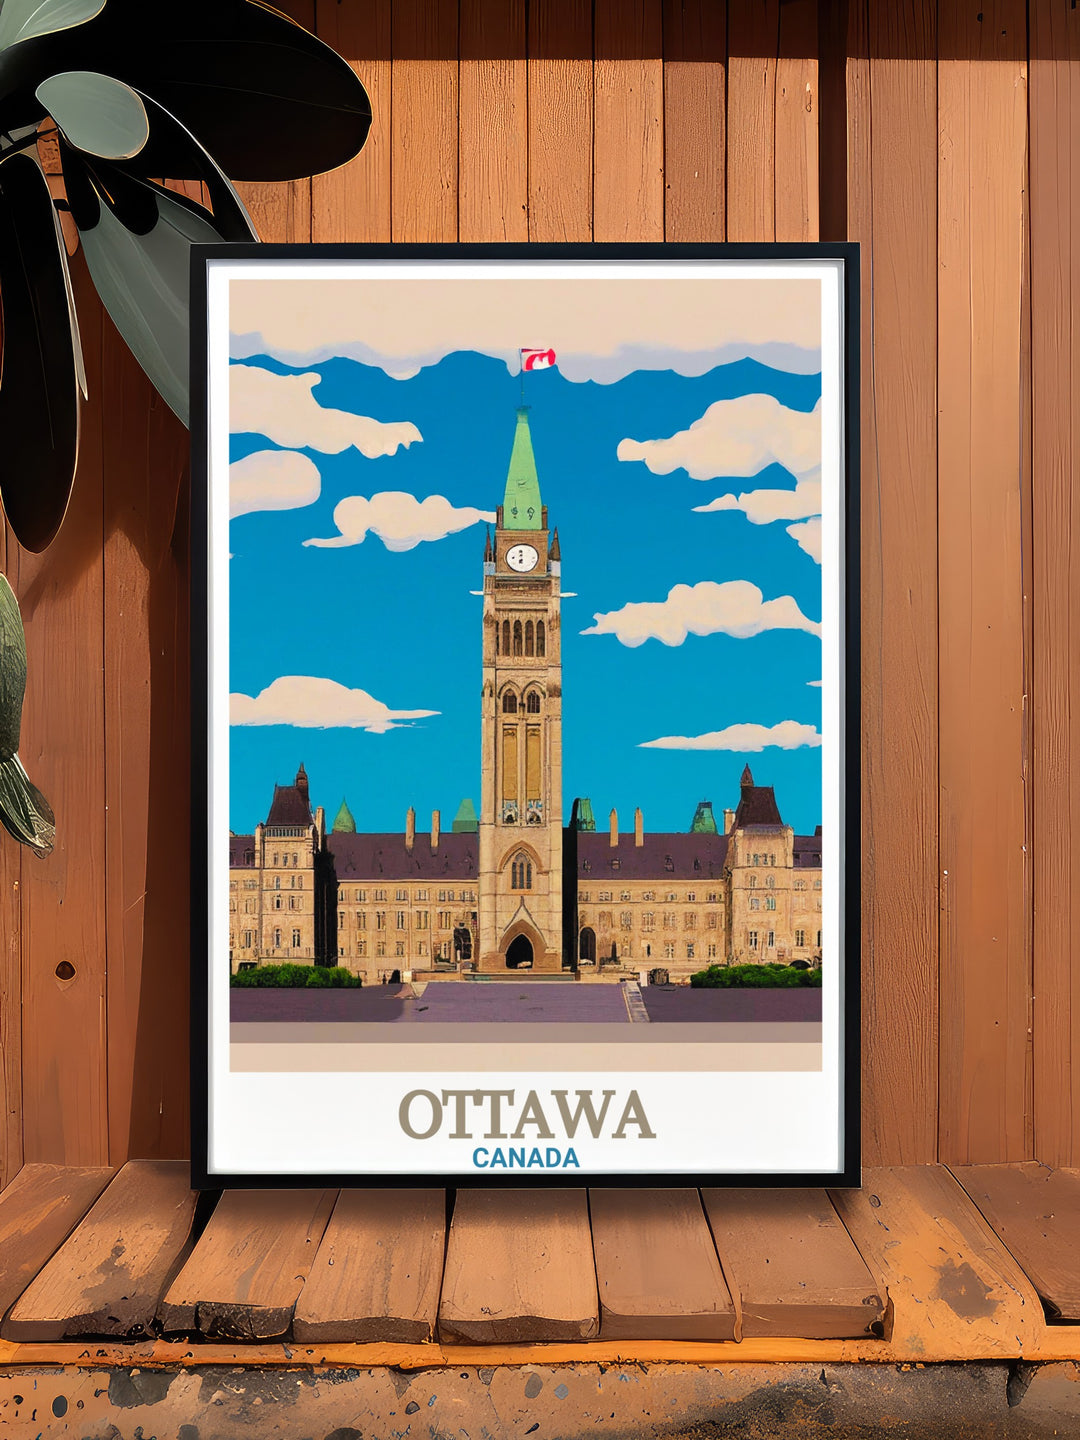 Beautiful Ottawa city Map with Parliament Hill highlighted. This art print is perfect for those who appreciate detailed cartography and the historical significance of Ottawas landscape. Ideal for home decor and educational purposes.